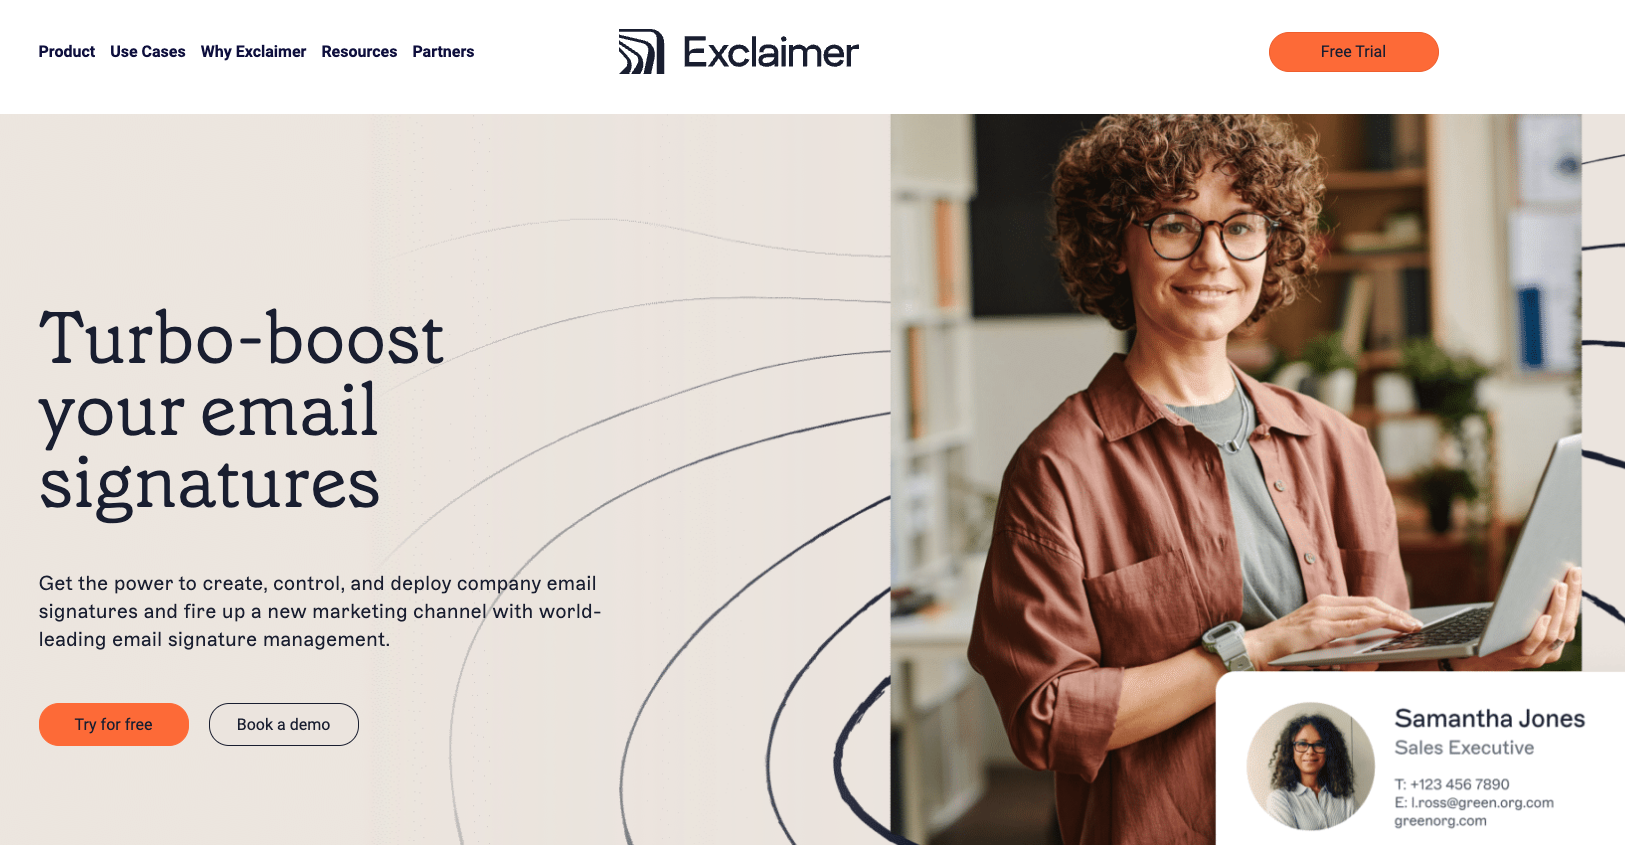 Exclaimer Cloud